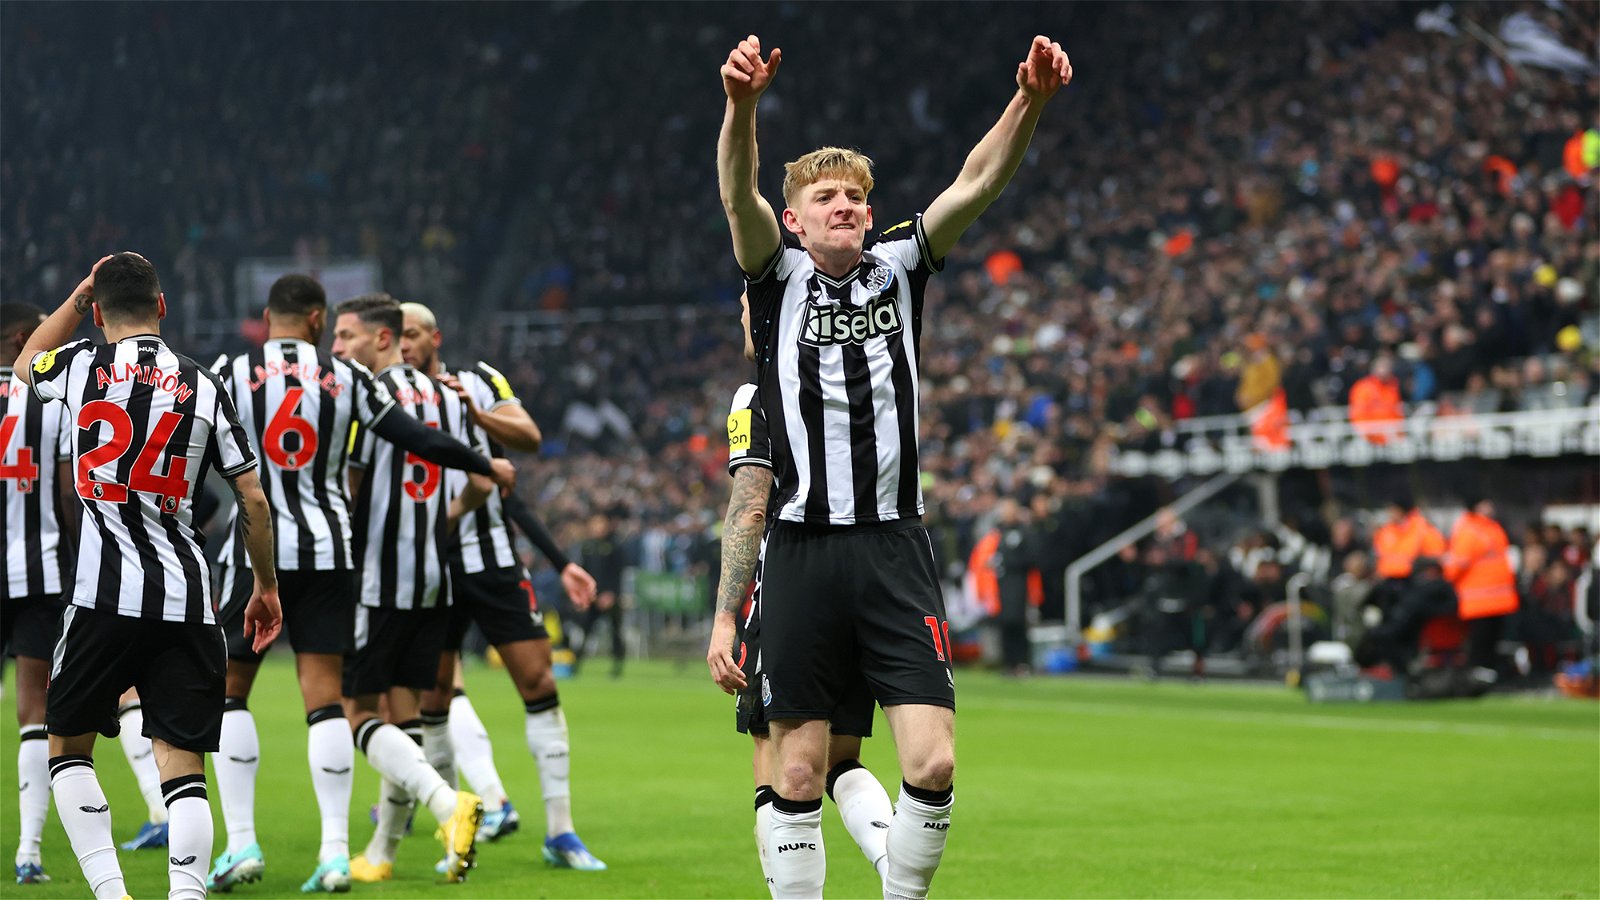  A Newcastle United player celebrates scoring a goal in front of the home crowd at St. James' Park while the club is rumored to be selling players.